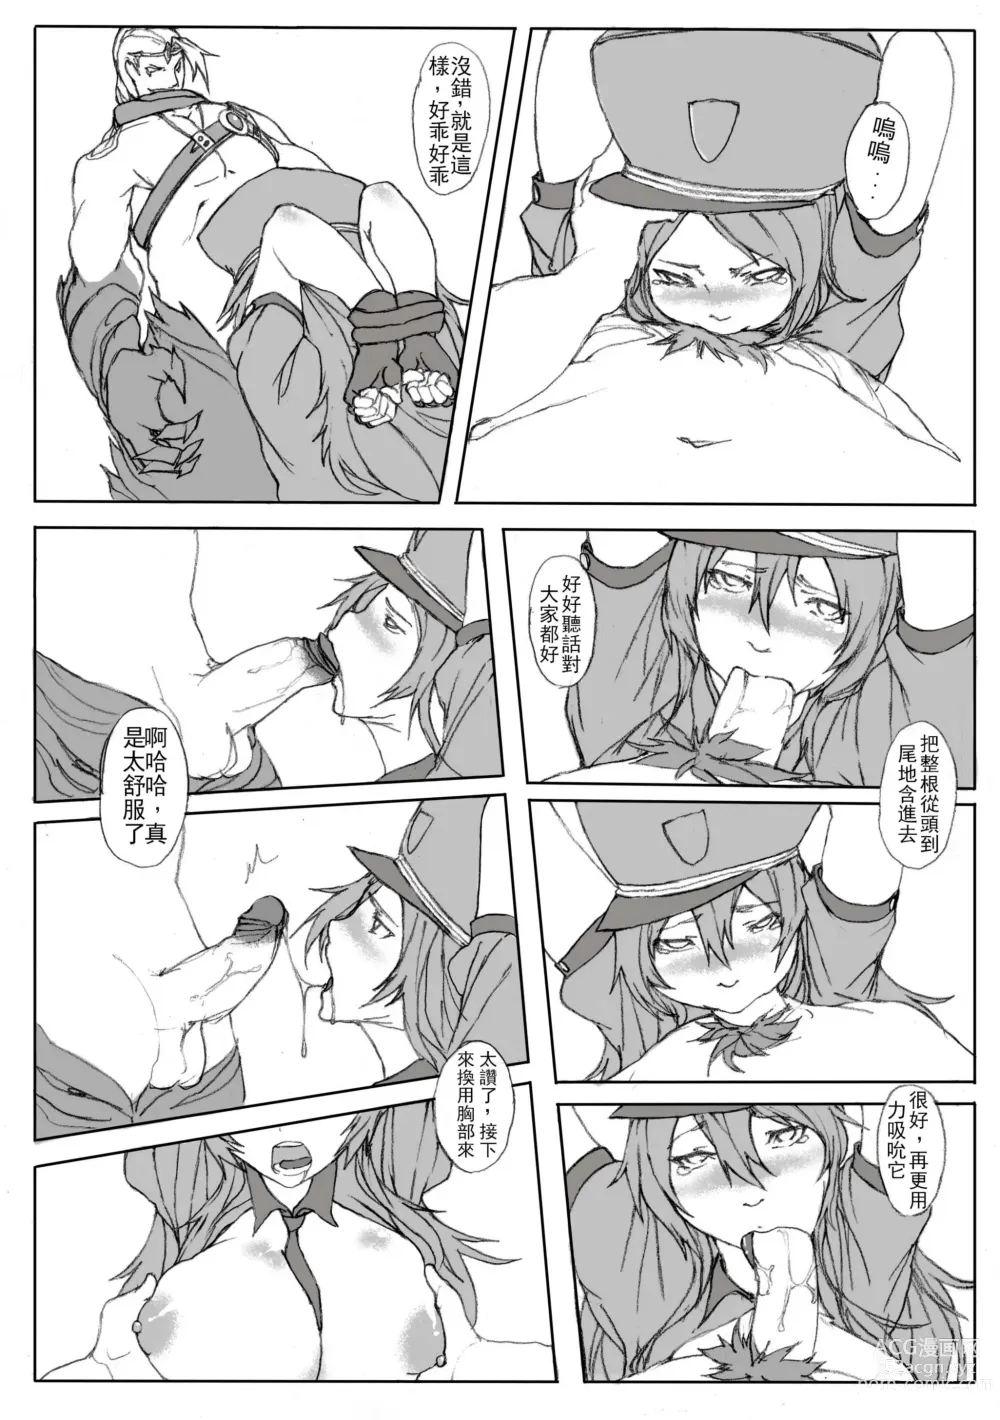 Page 8 of doujinshi 凱特琳壞壞 (League of Legends) [無修正]中文